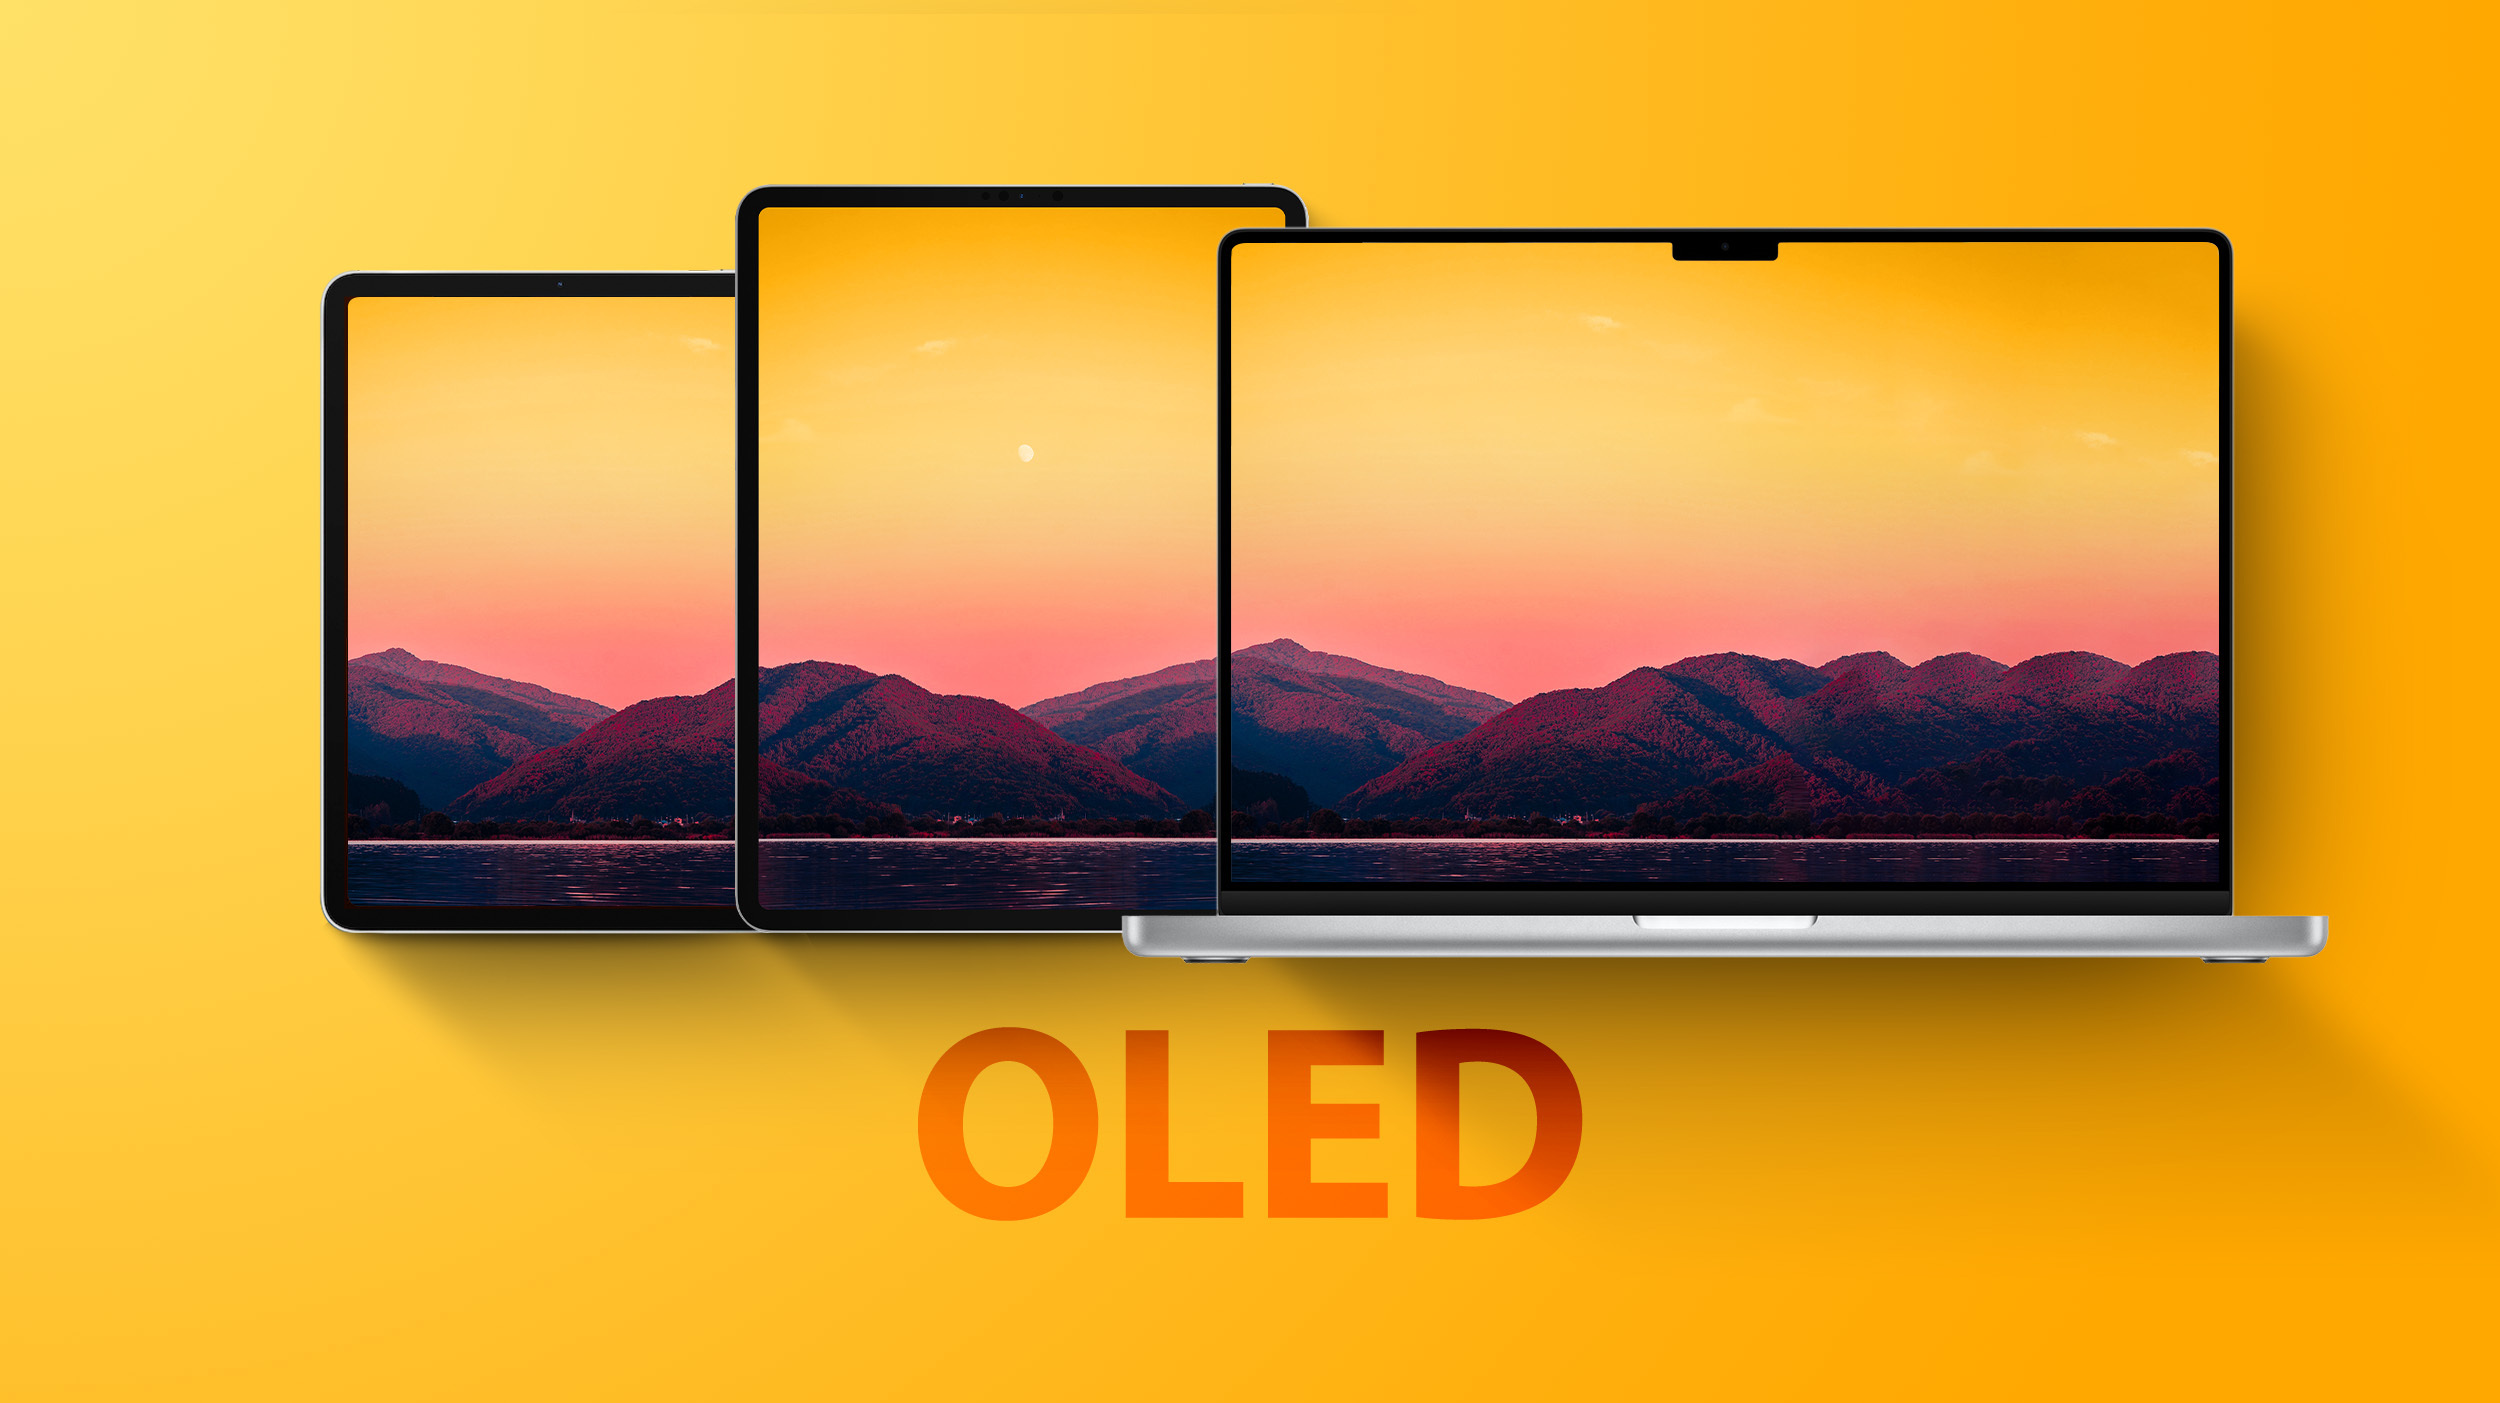 Samsung Aiming to Supply OLED Displays for Both iPads and MacBooks